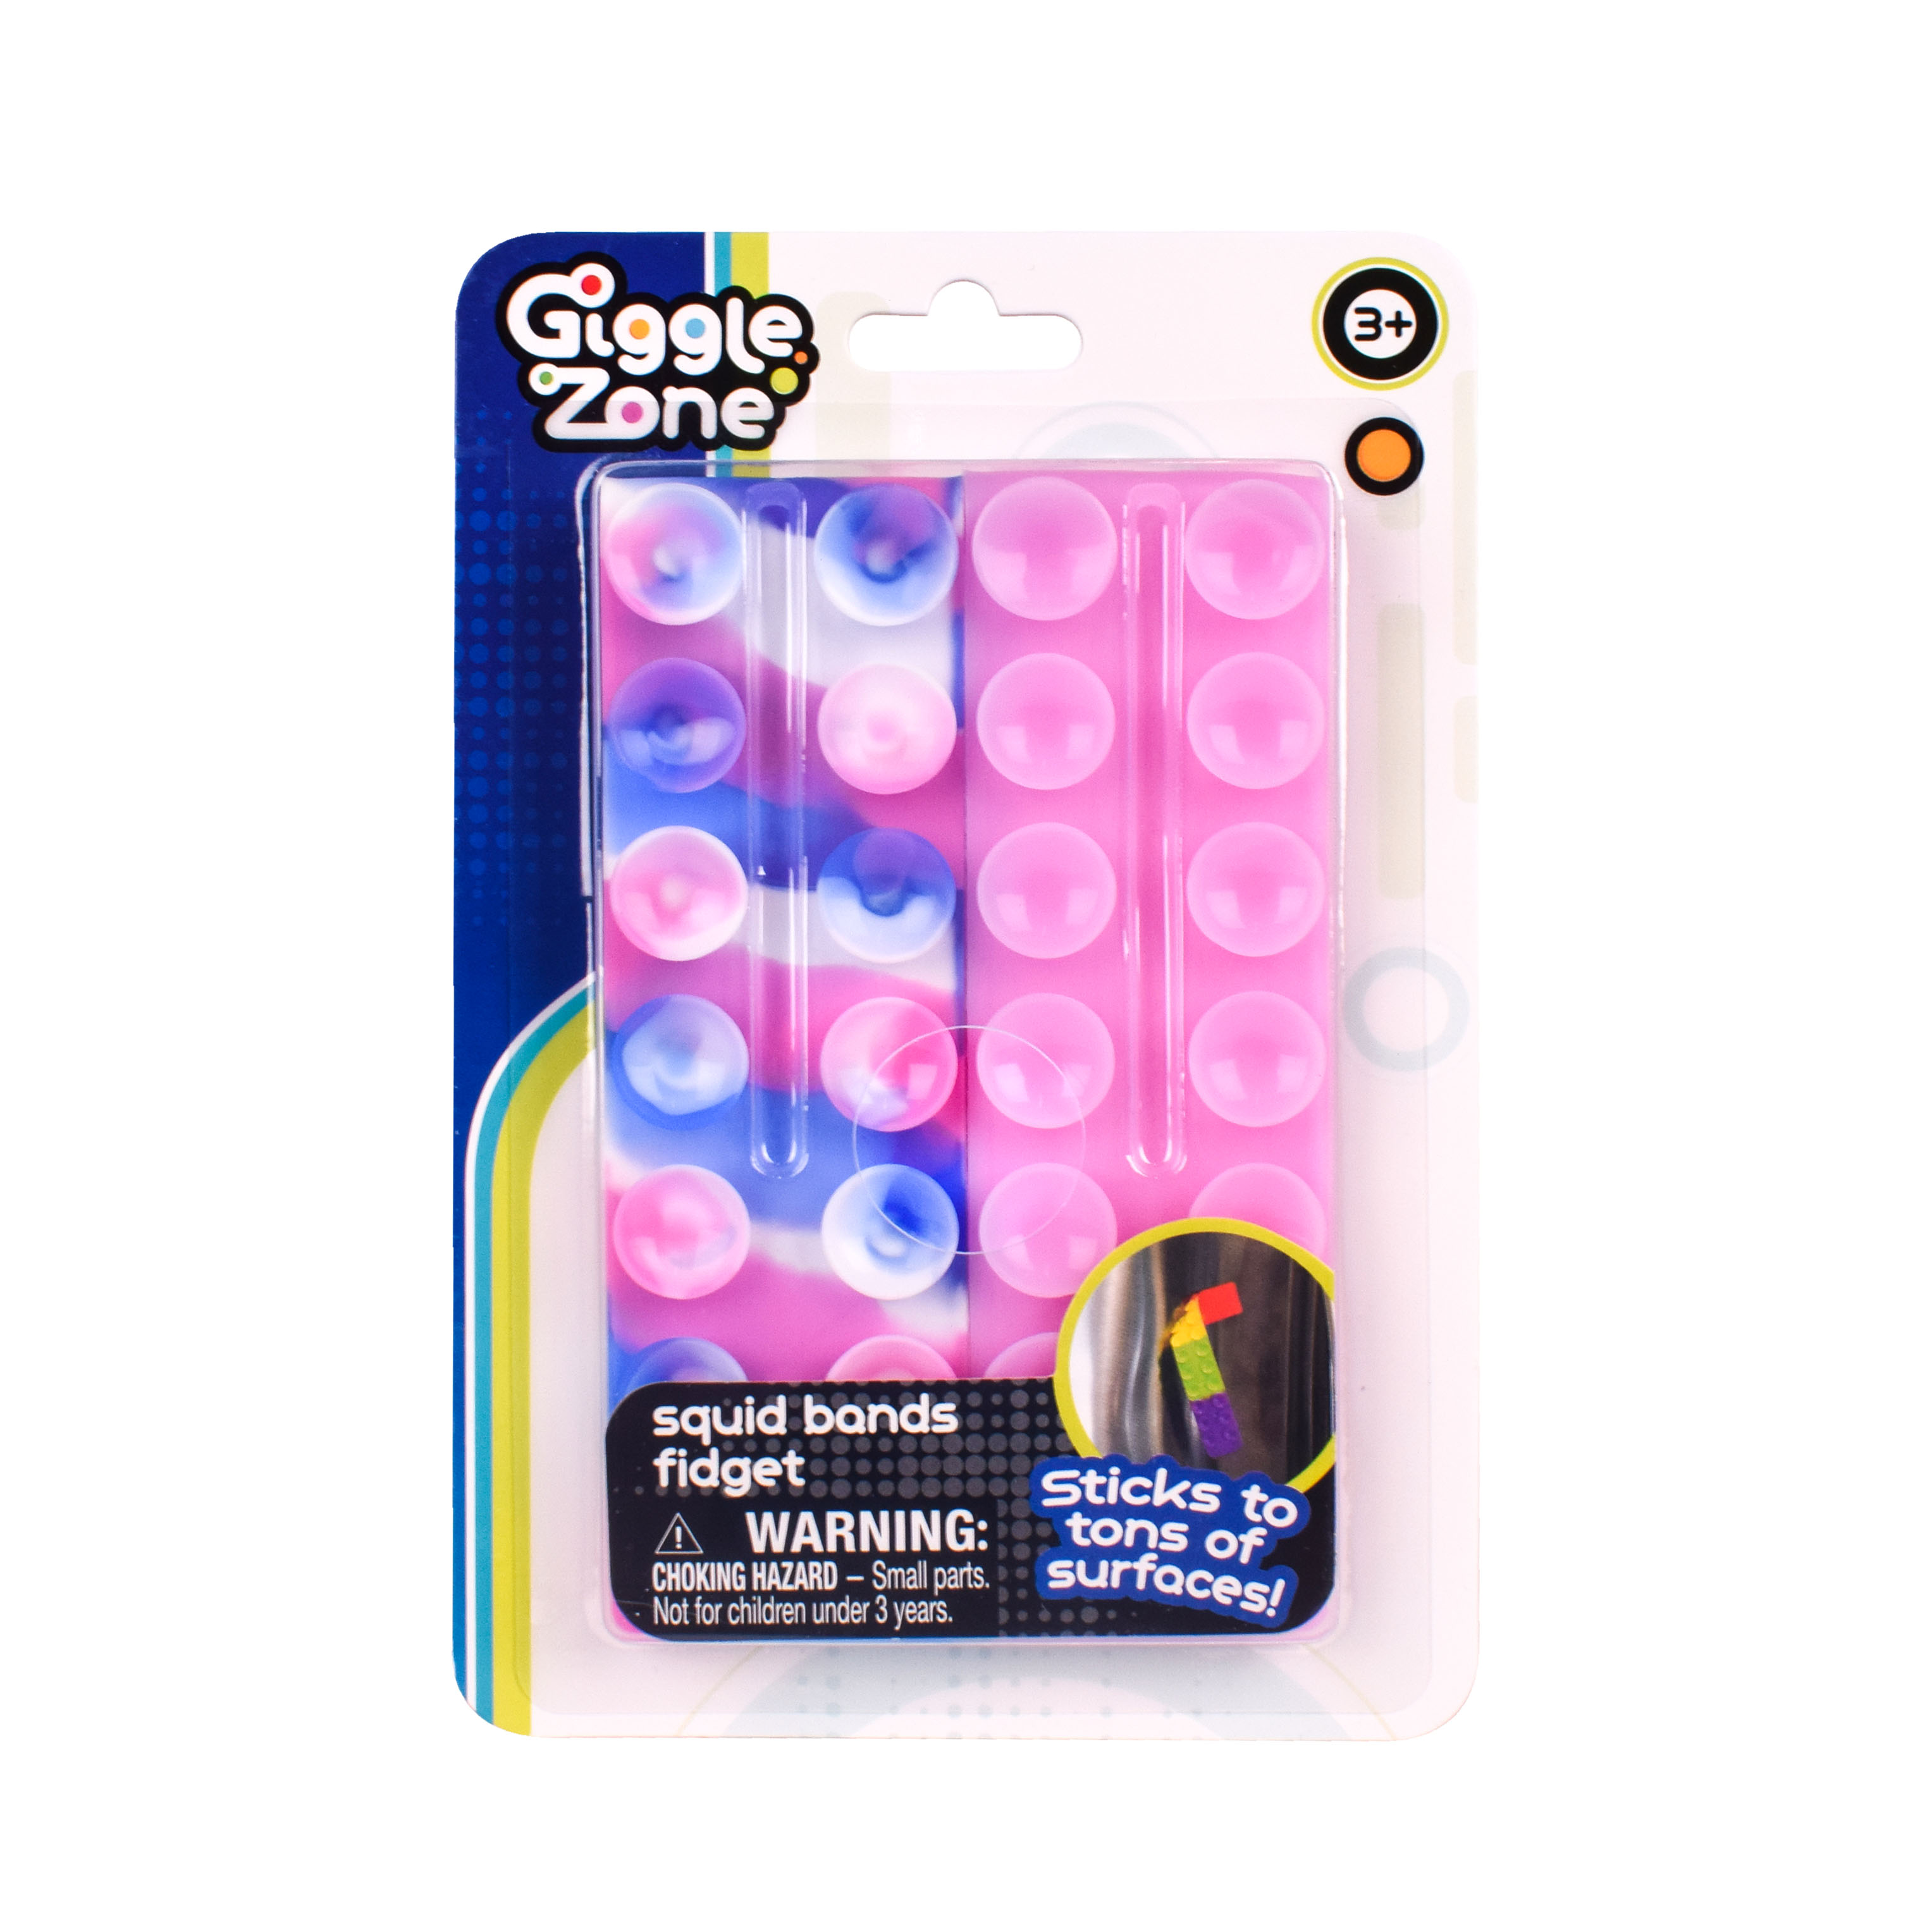 Giggle Zone Squid Pop Bands Fidget – Suction Cup Sensory Toy | Ages 3+ - image 4 of 5